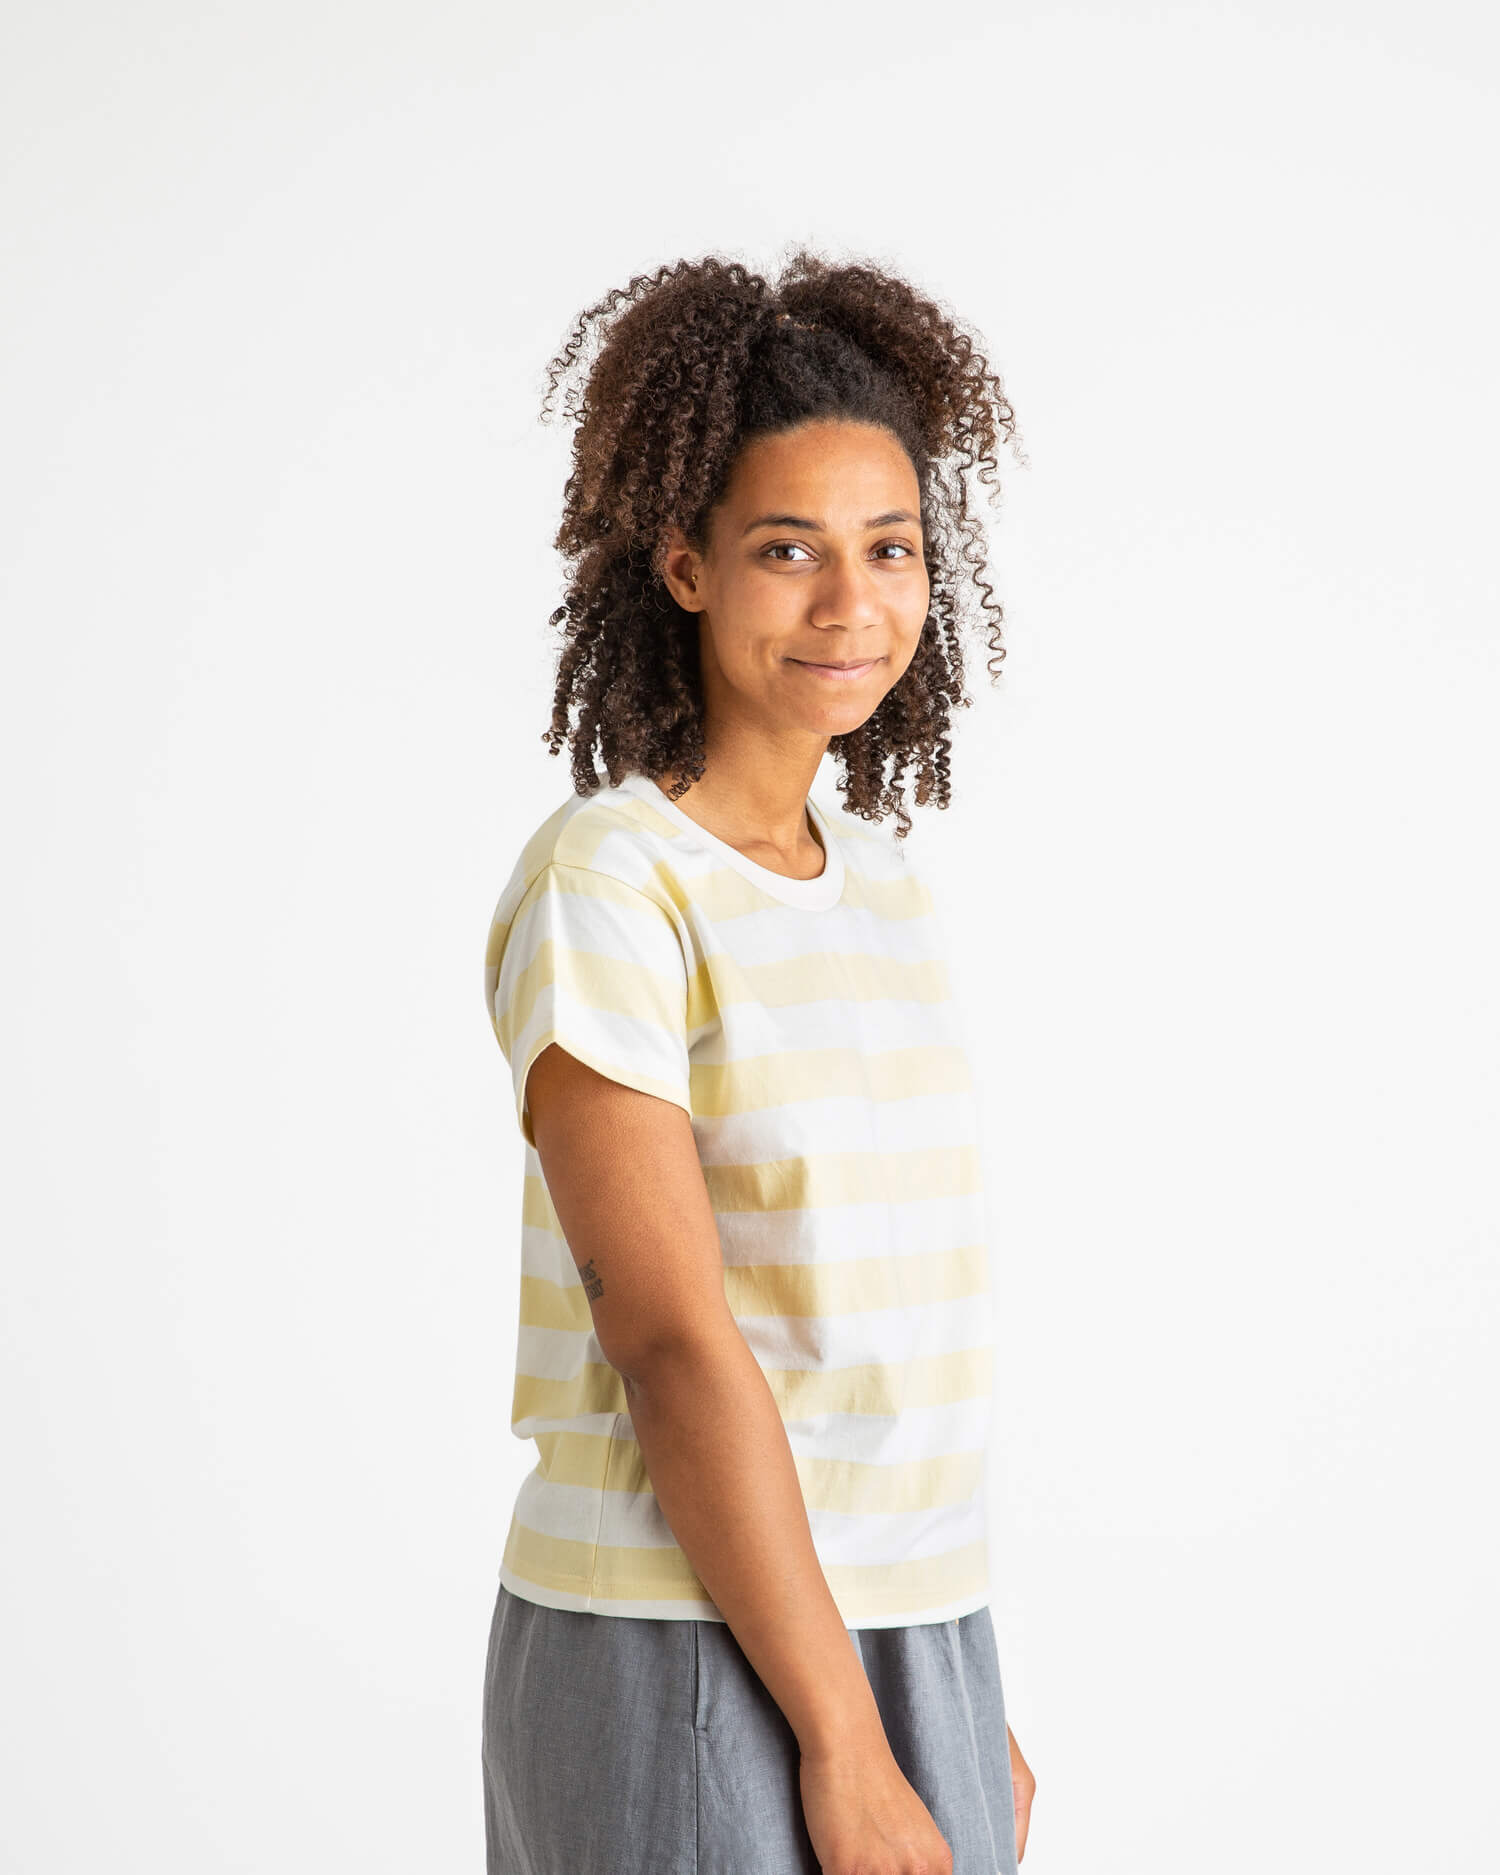 Yellow and white striped T-shirt made from 100% organic cotton from Matona